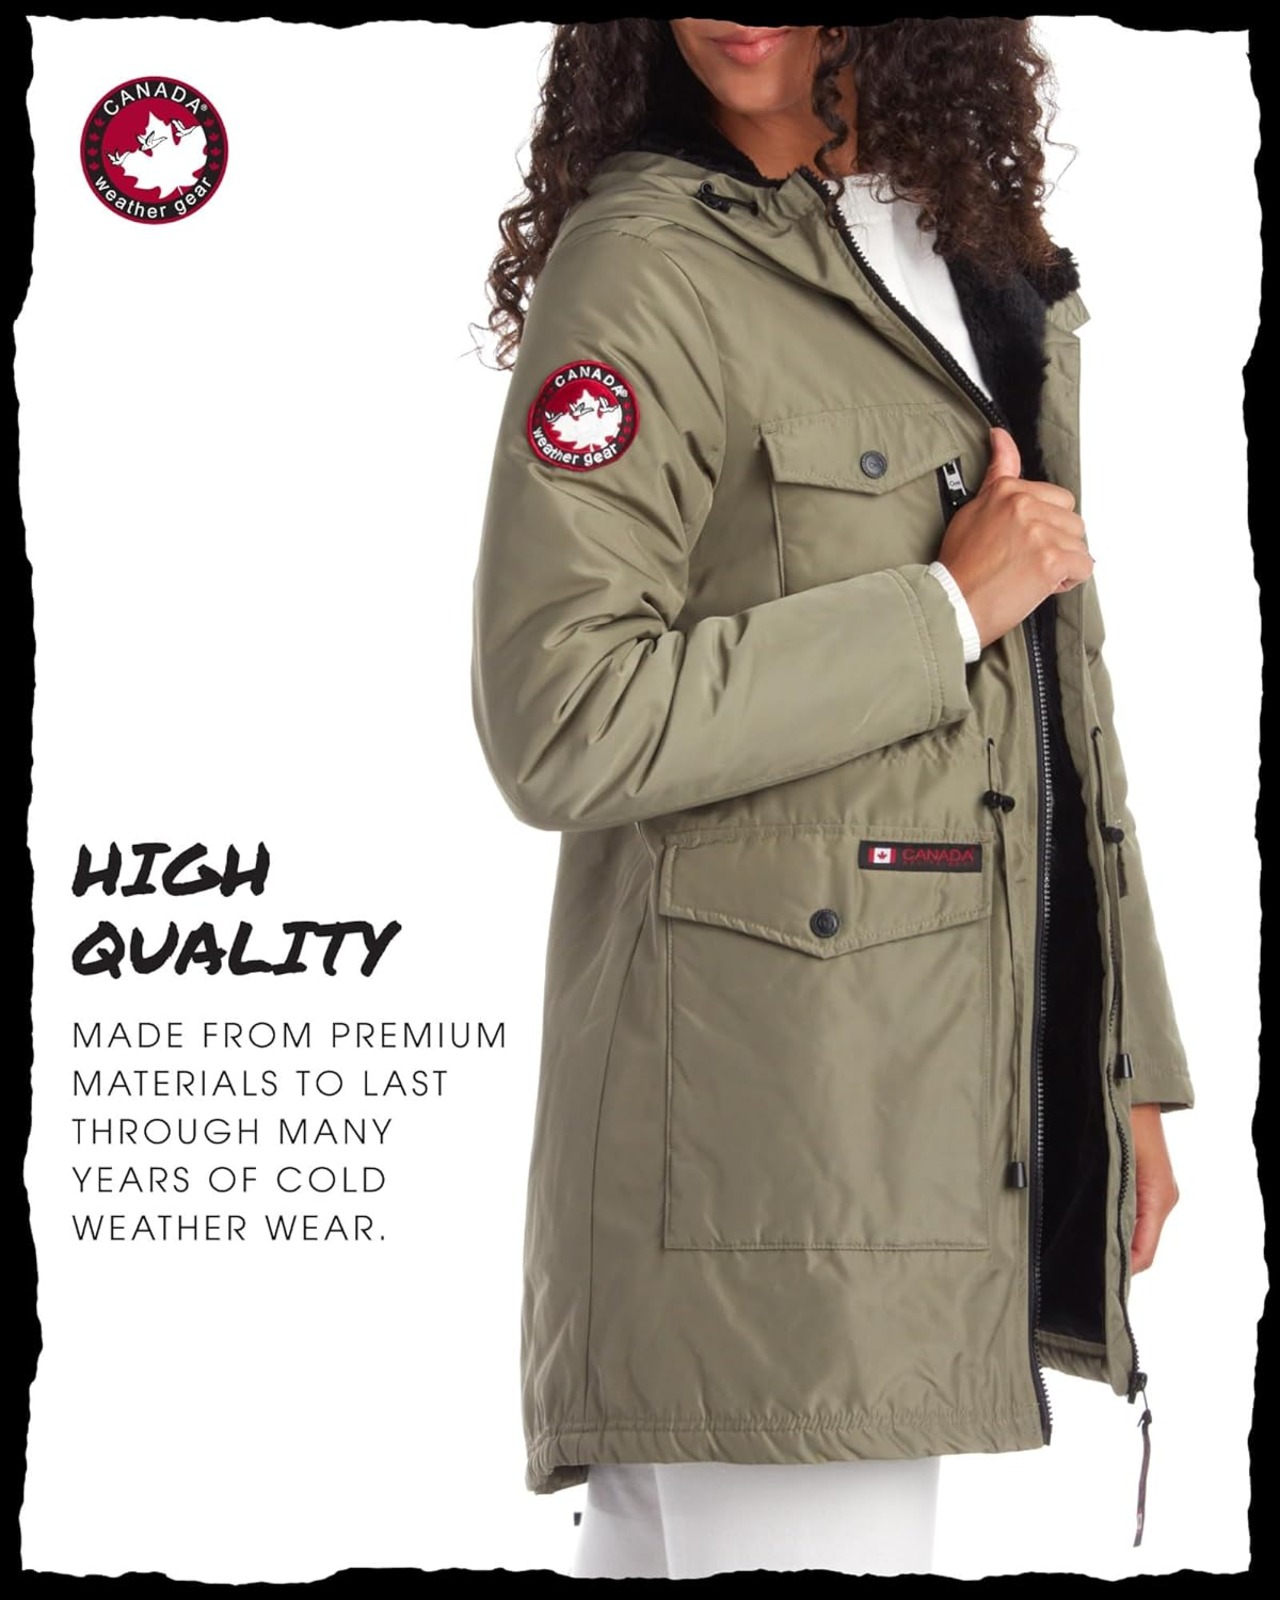 CANADA WEATHER GEAR Womens Winter Coat – Heavyweight Sherpa Lined Anorak Parka (S-XL) - image 5 of 7